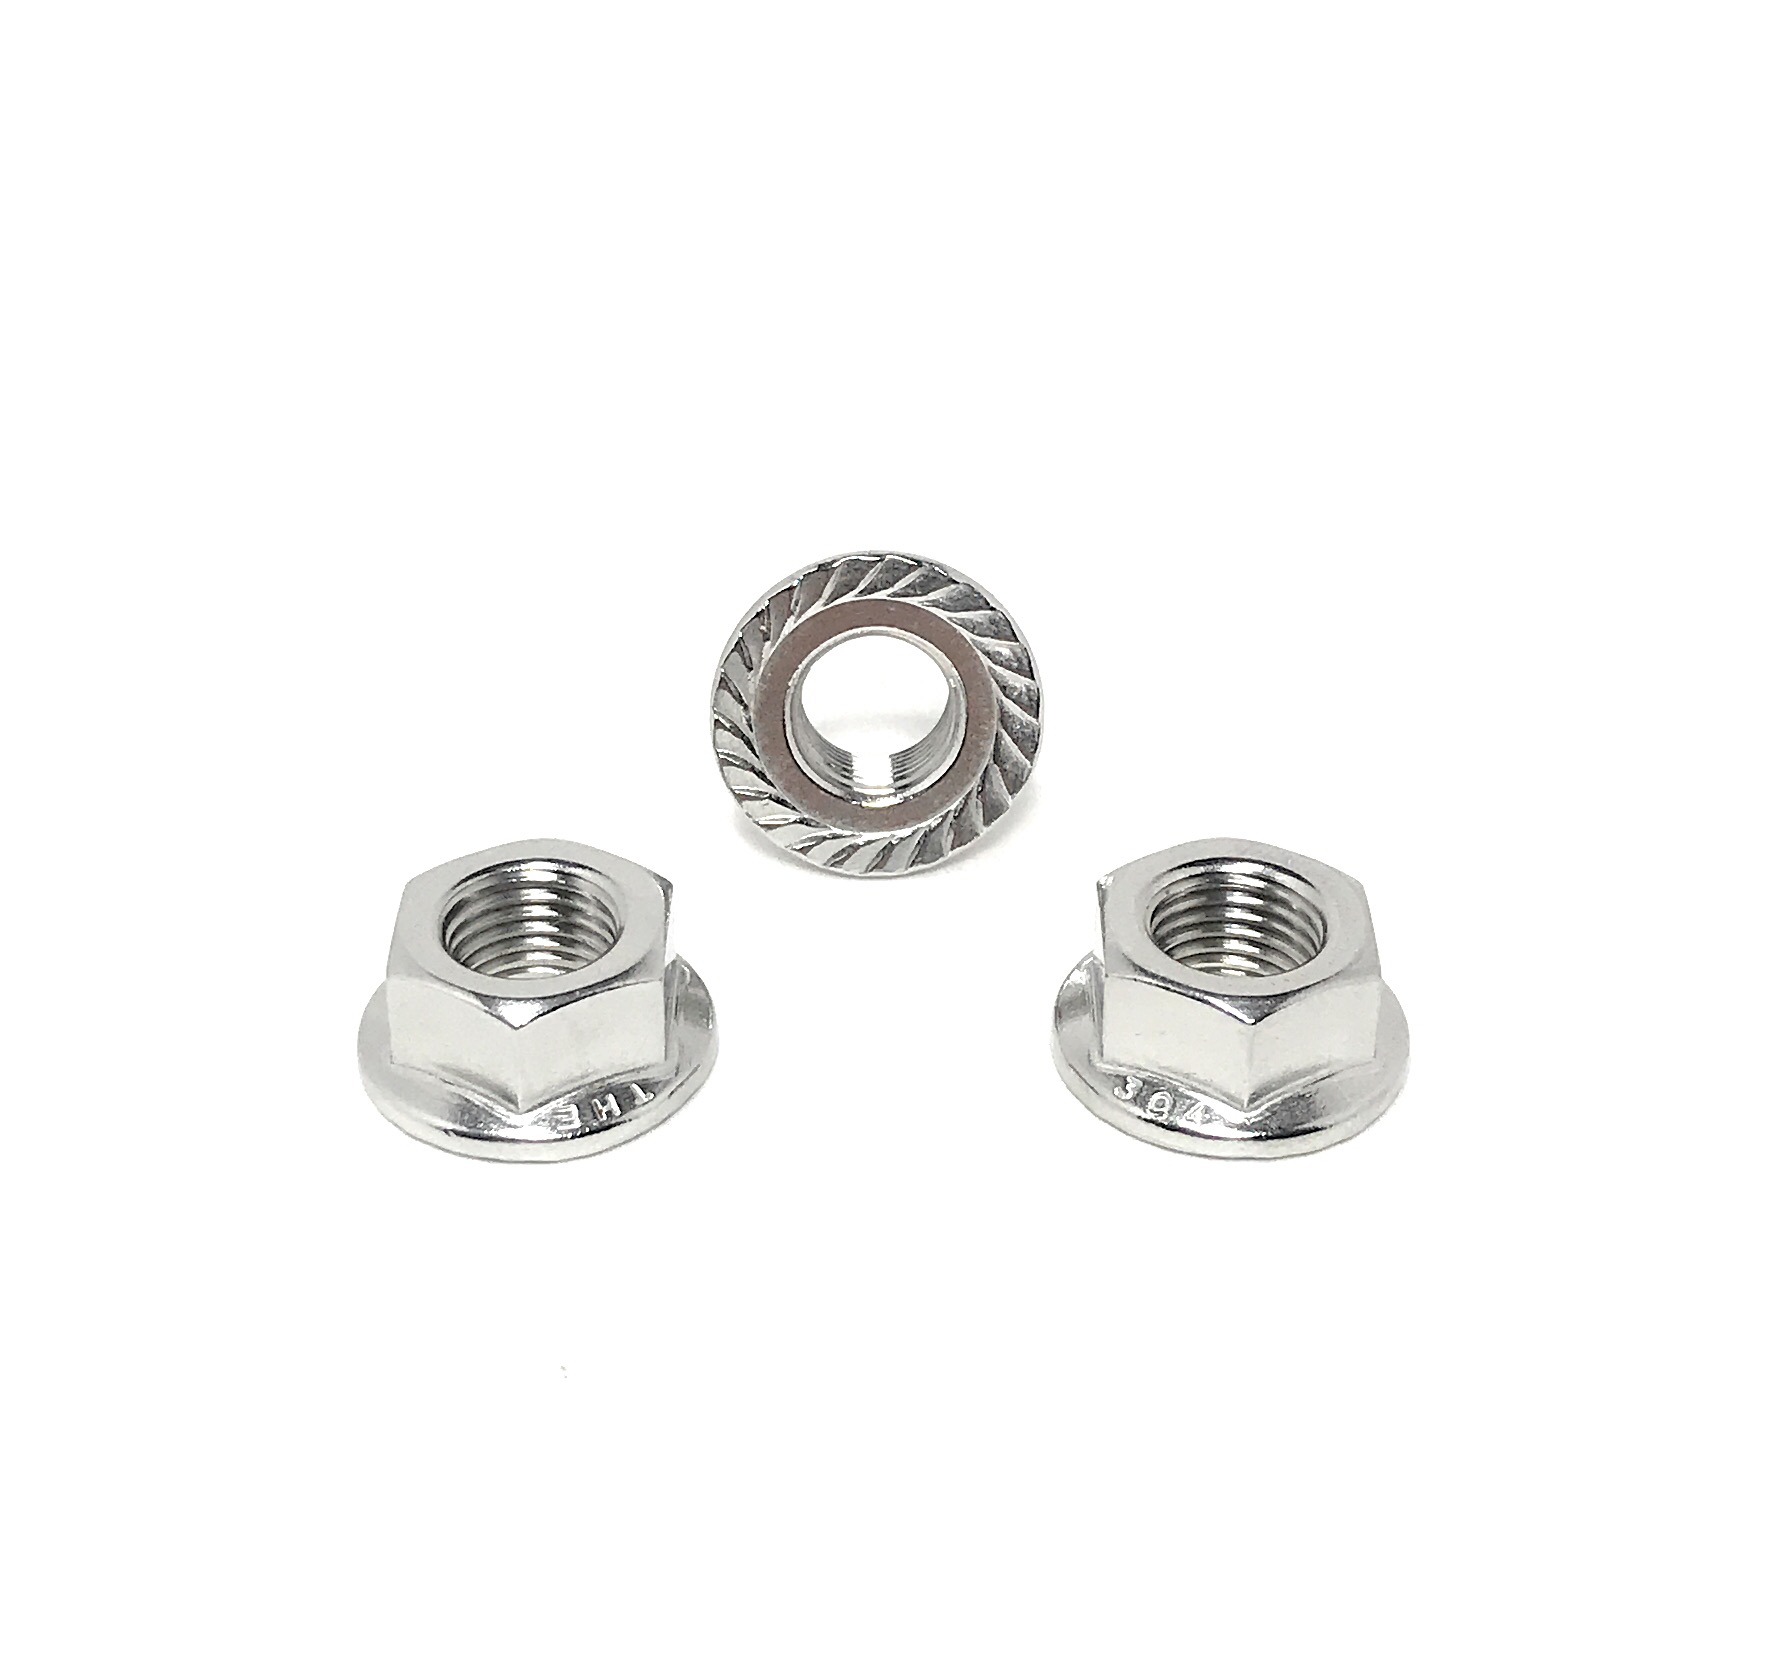 STAINLESS STEEL SERRATED FLANGE HEX LOCK NUTS 8-32 Qty 2500 